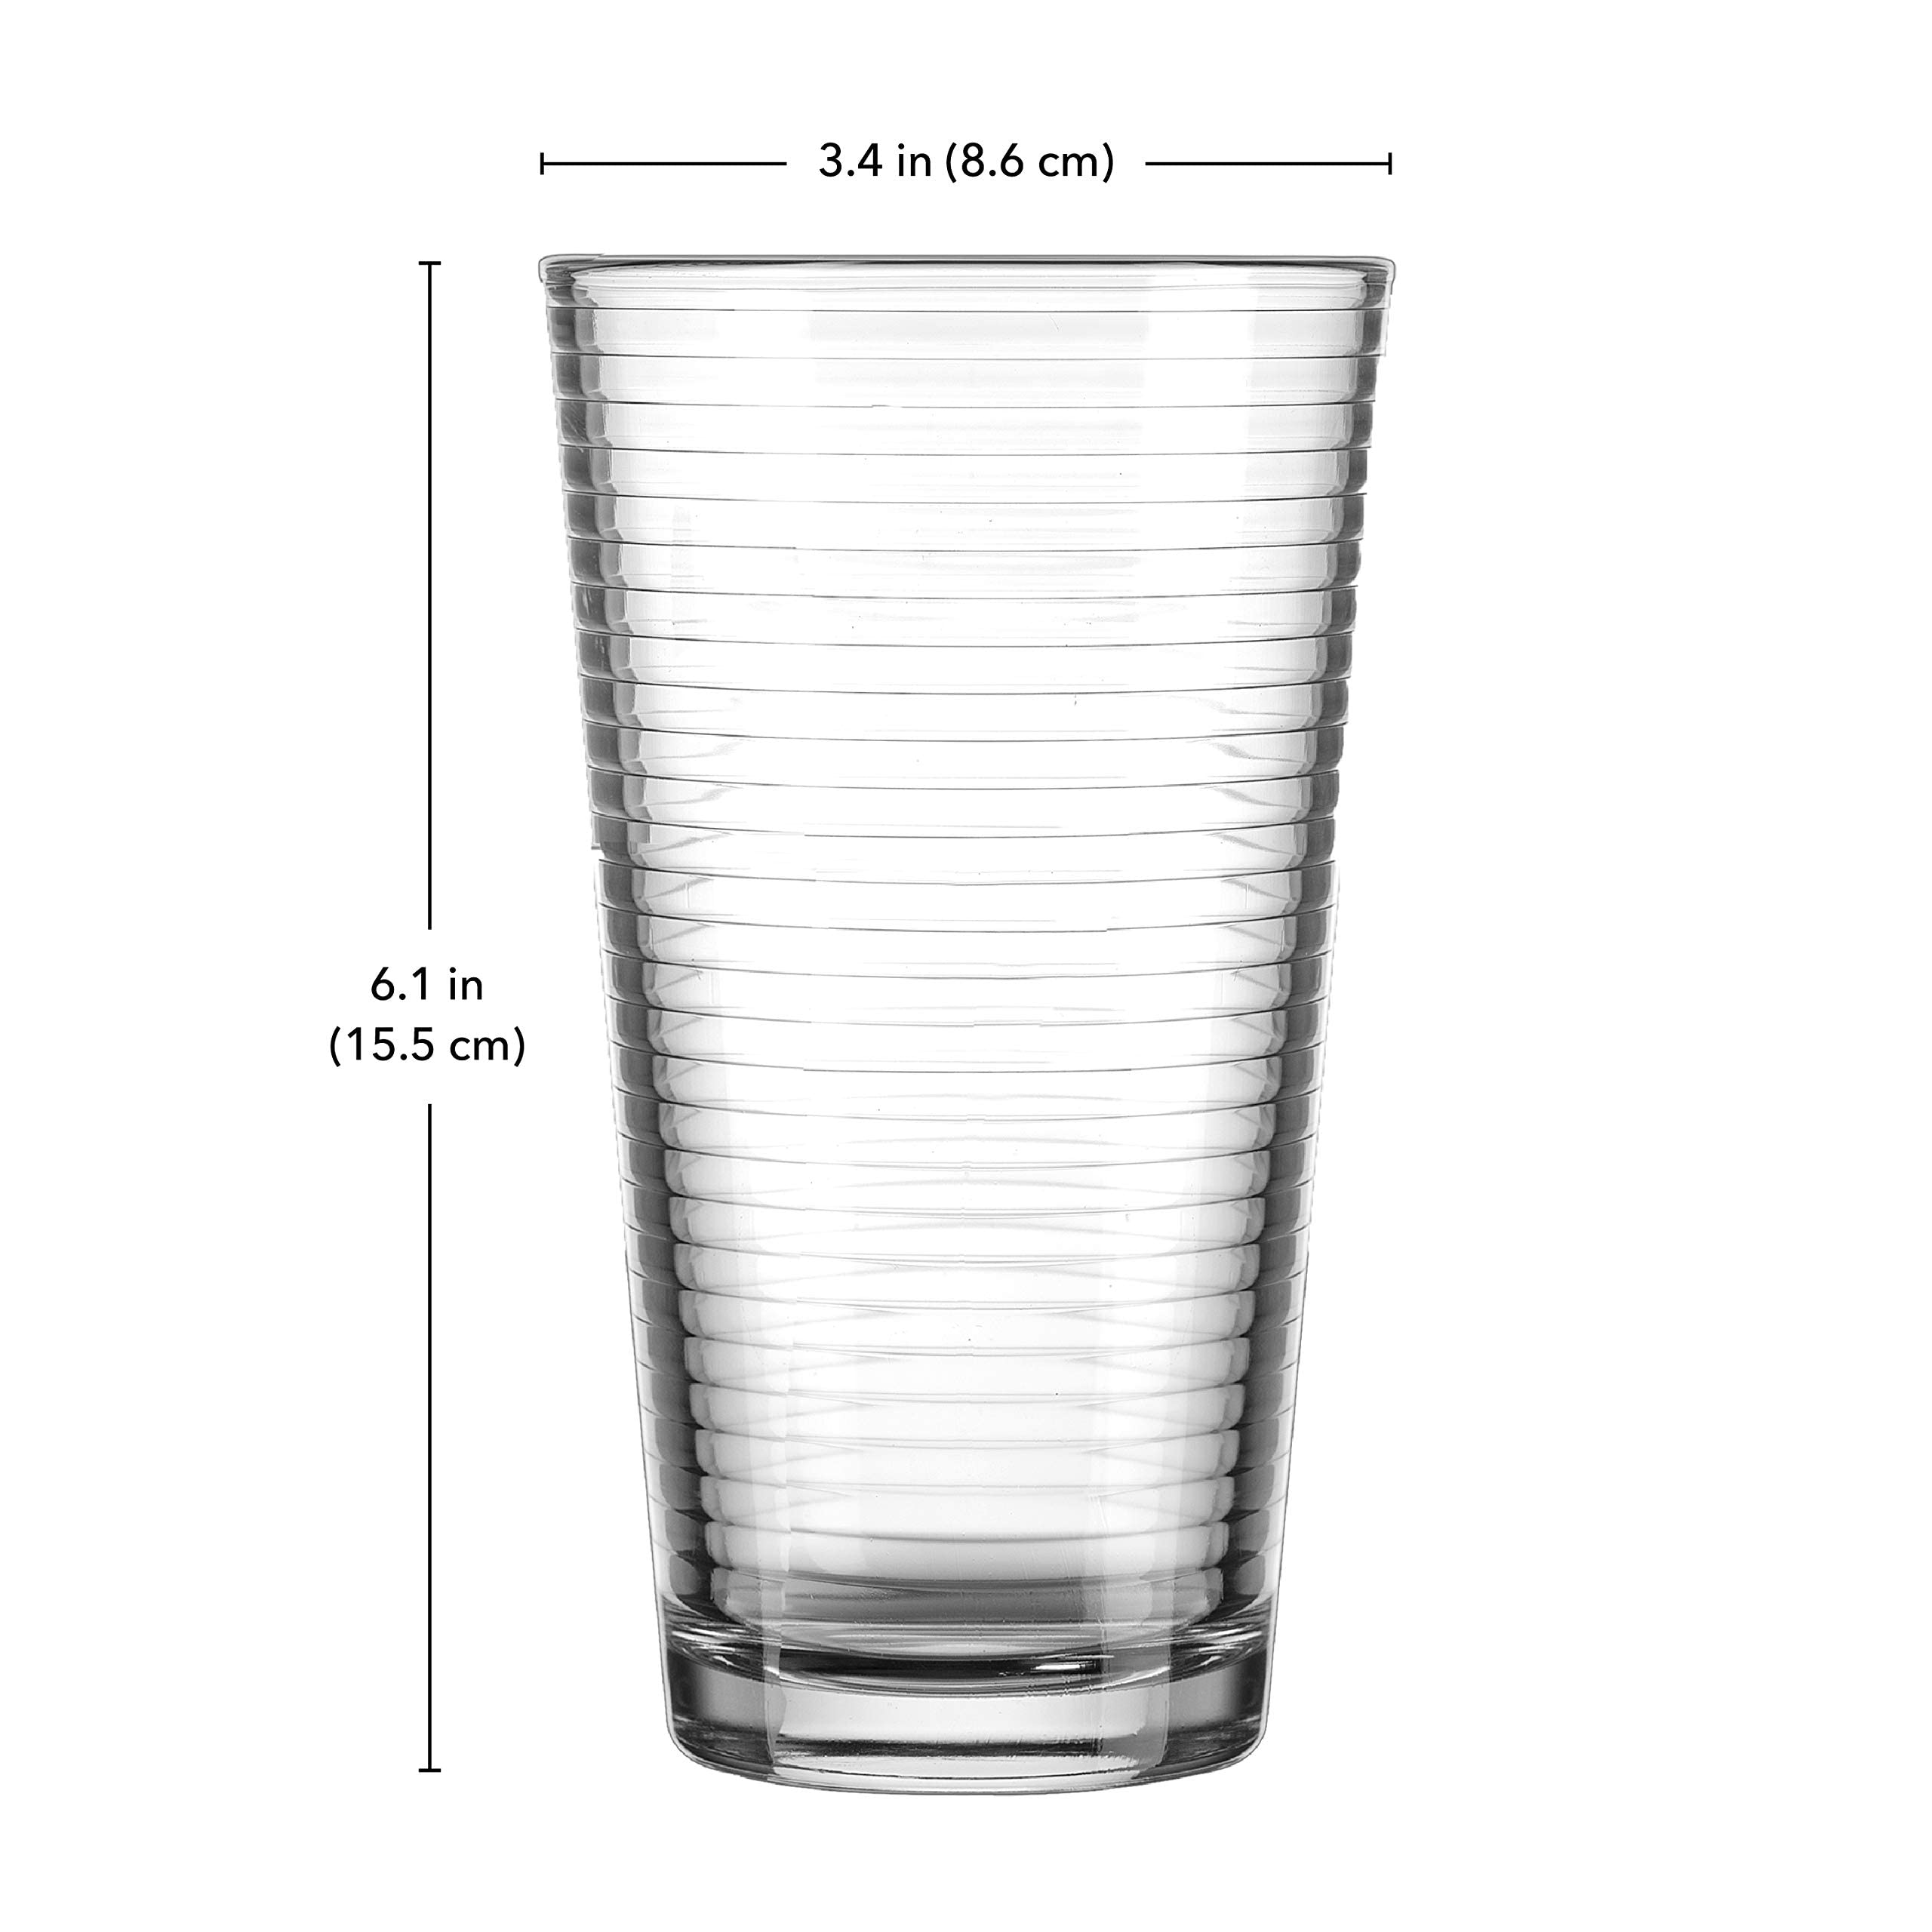 Drinking Glasses Set of Highball Glass Cups By Glavers, Premium Quality Cooler 17 Oz. Ribbed Glassware. Ideal for Water, Juice, Cocktails, and Iced Tea. Dishwasher Safe.…  - Acceptable